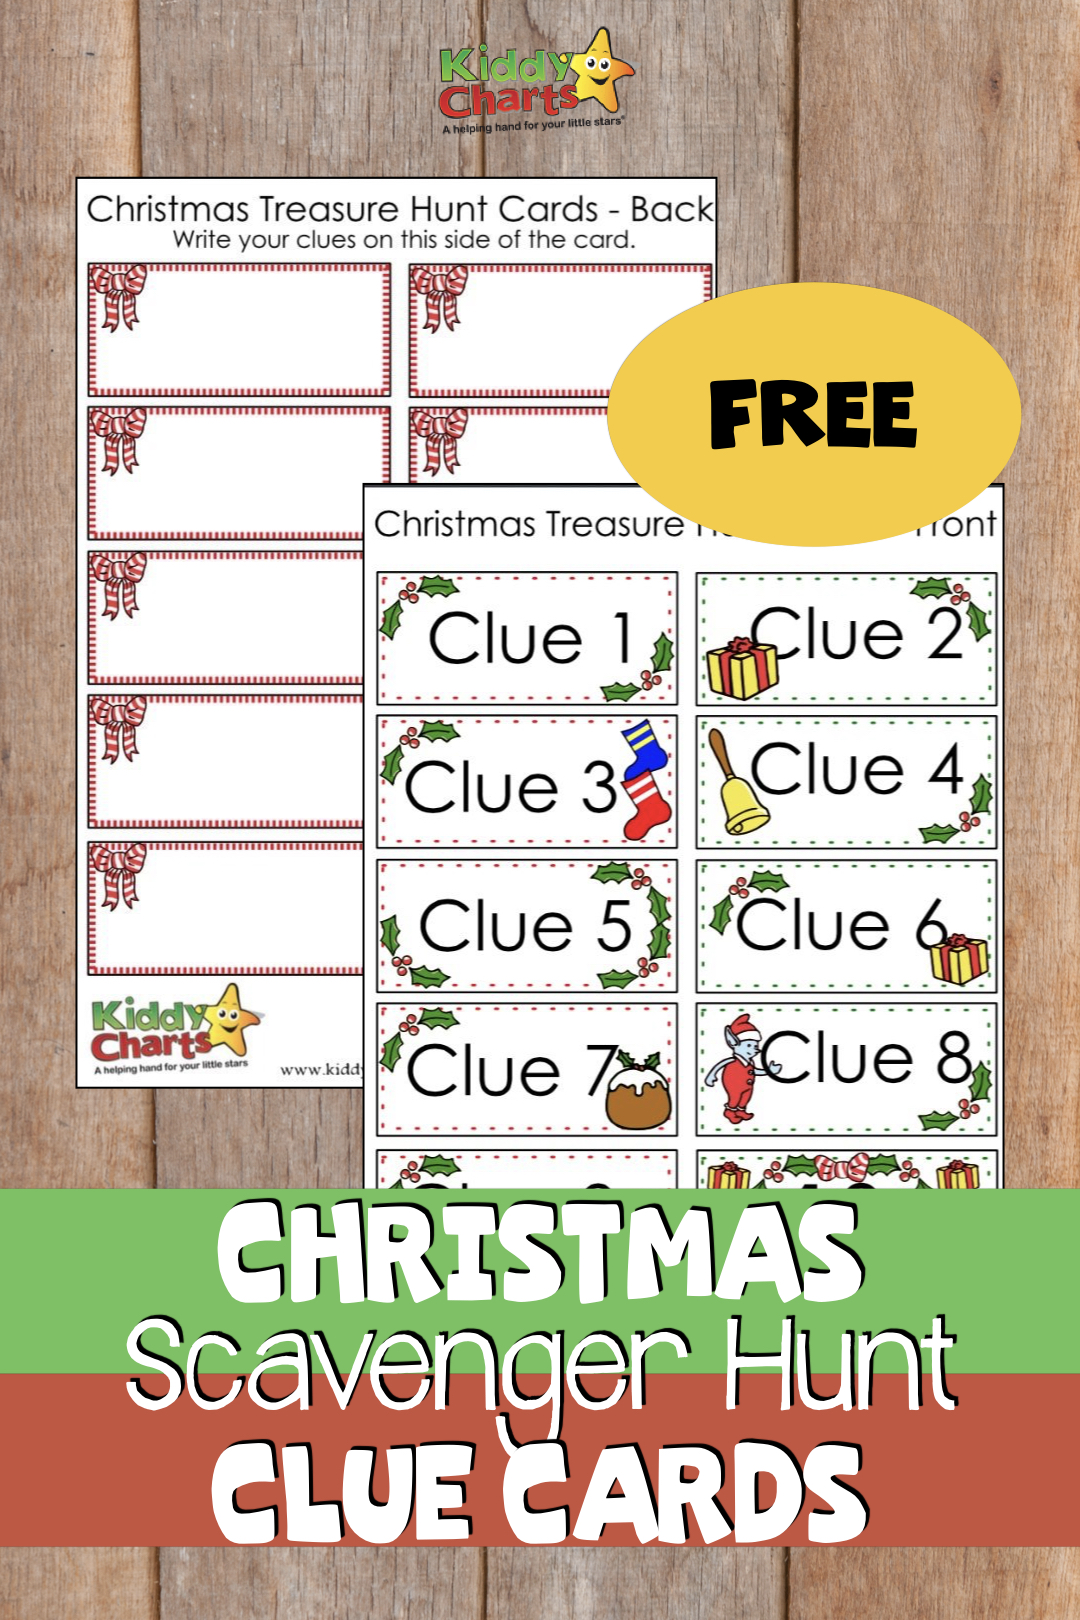 Christmas scavenger hunt free printable clue cards for kids With Clue Card Template